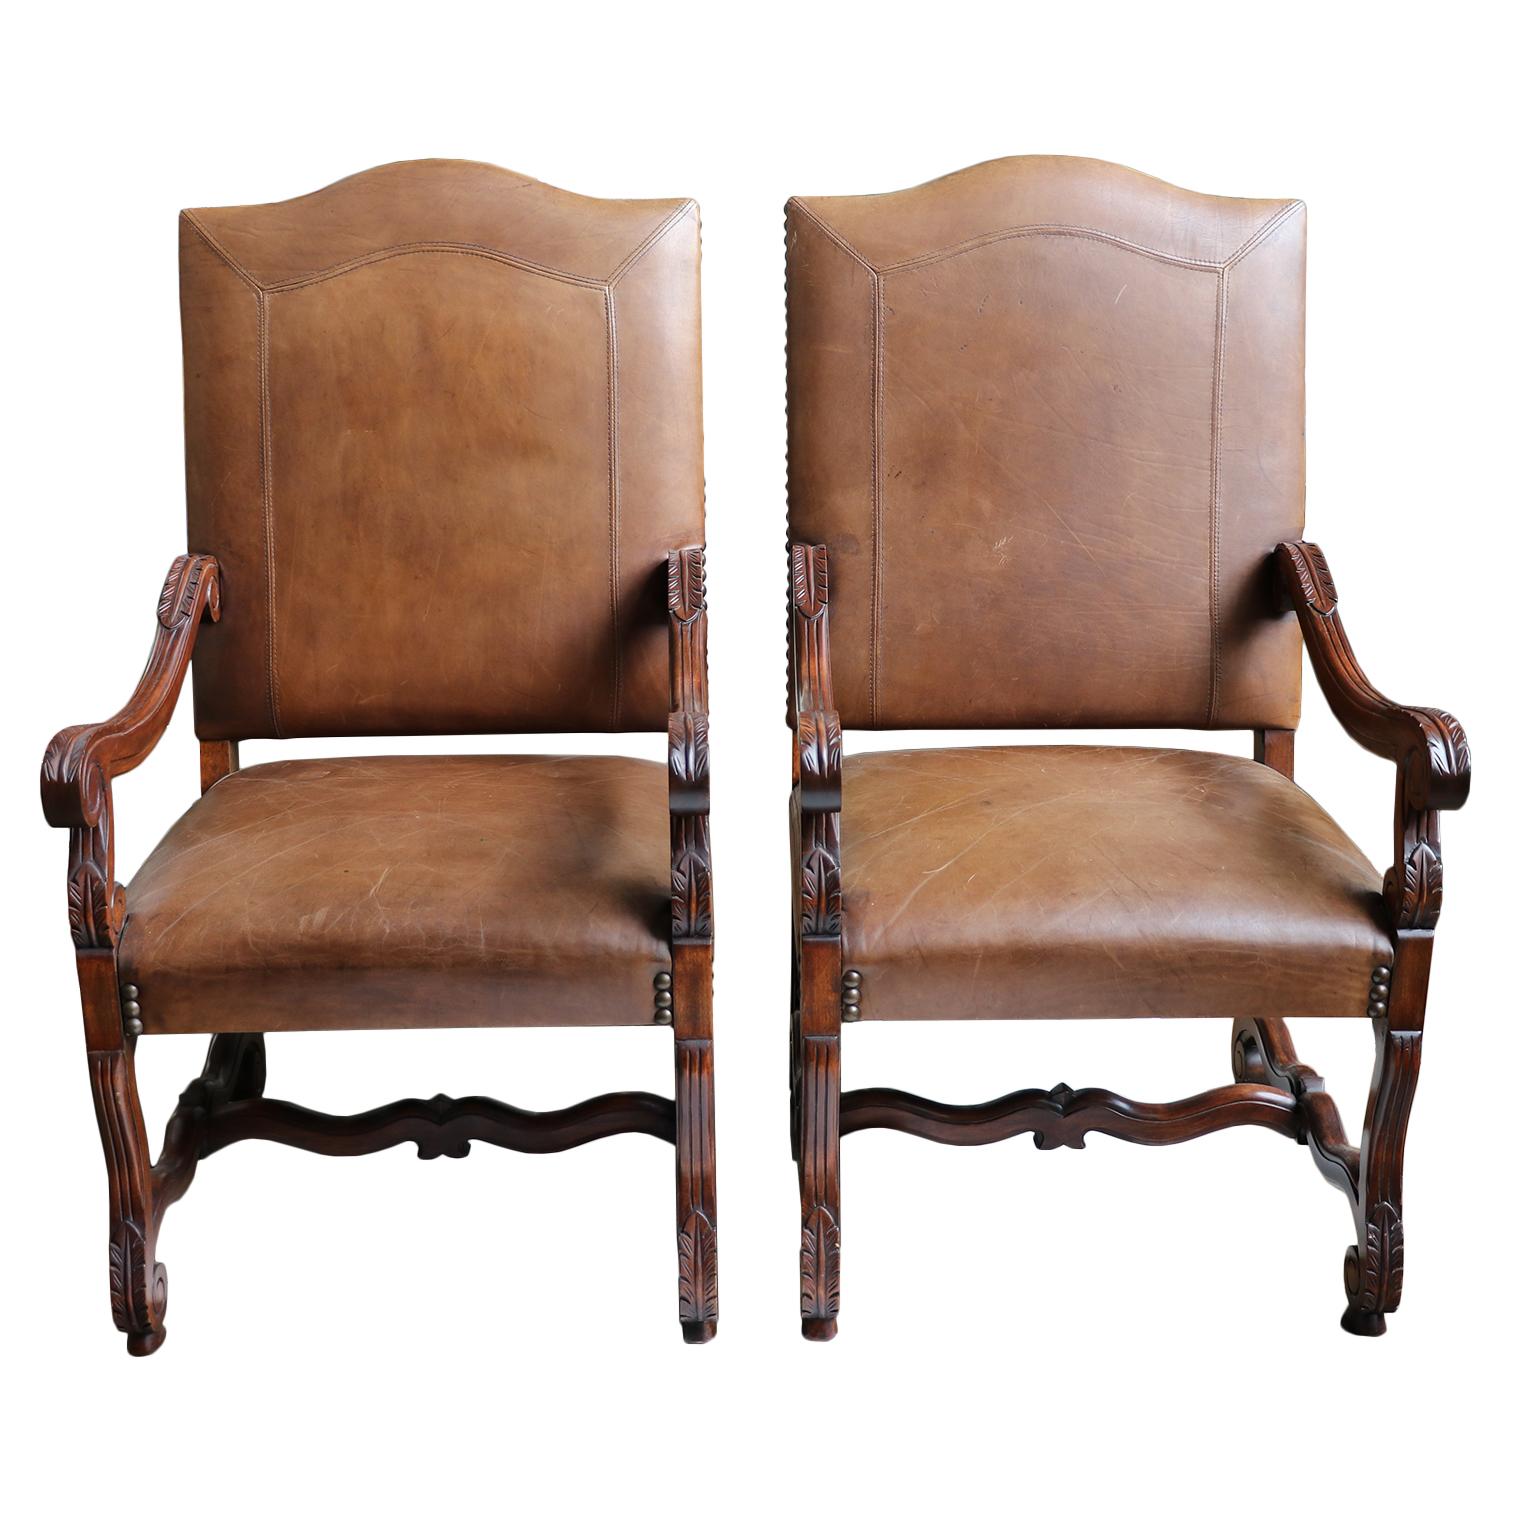 Pair of sturdy leather arm chairs with nail head and carving details. Note, the wear in the seating area and the pre-owned conditions.